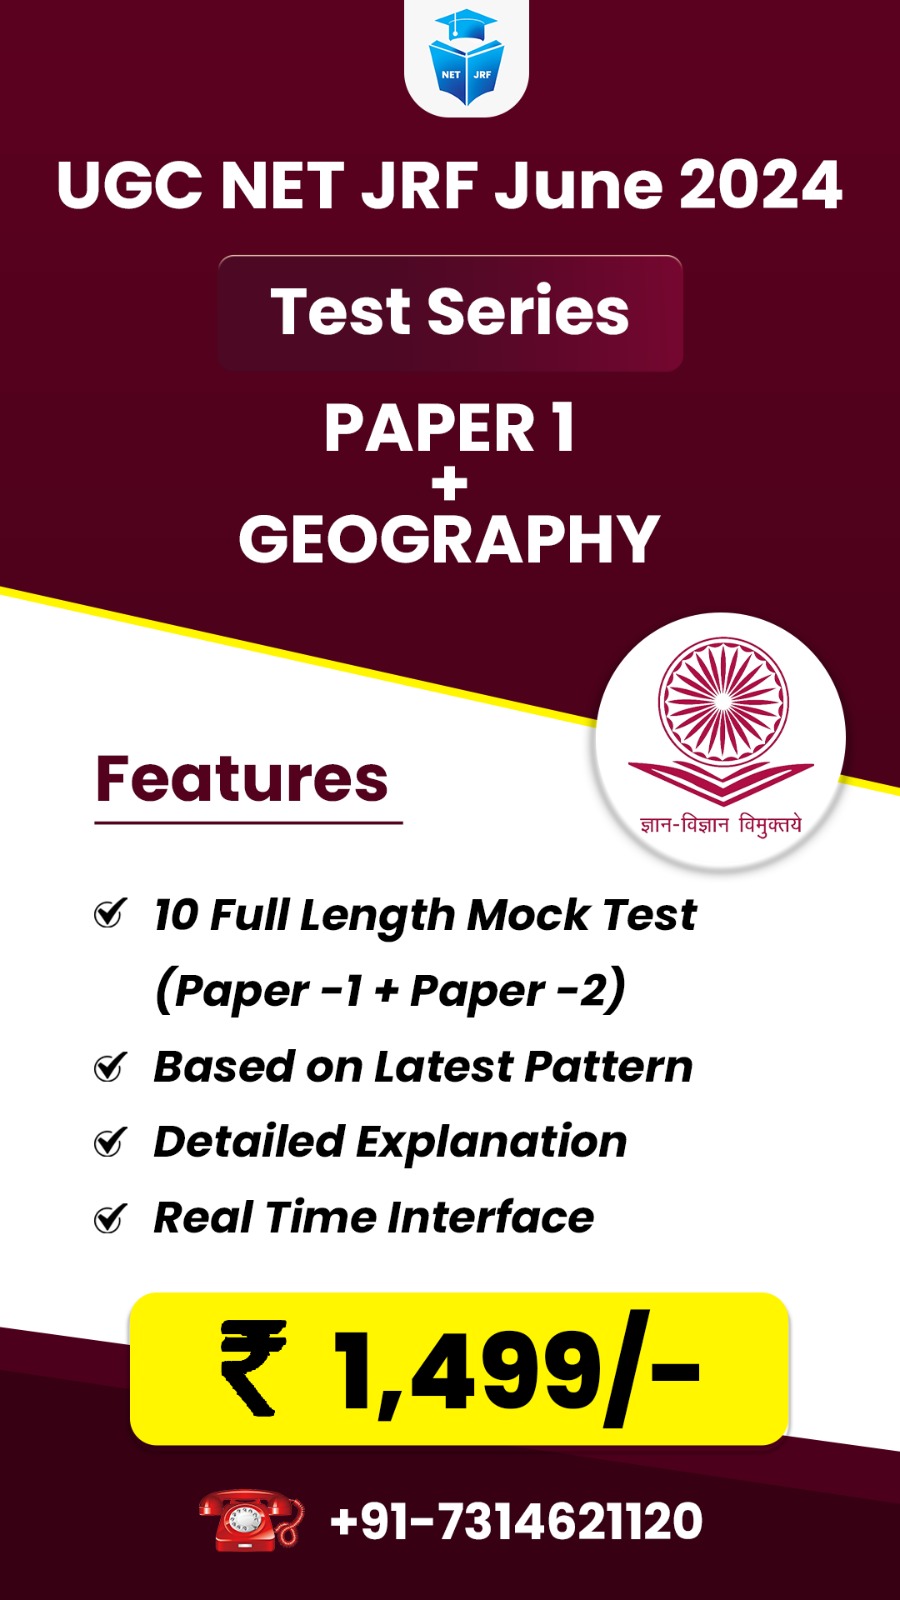 Geography (Paper 1 + Paper 2) Test Series for June 2024